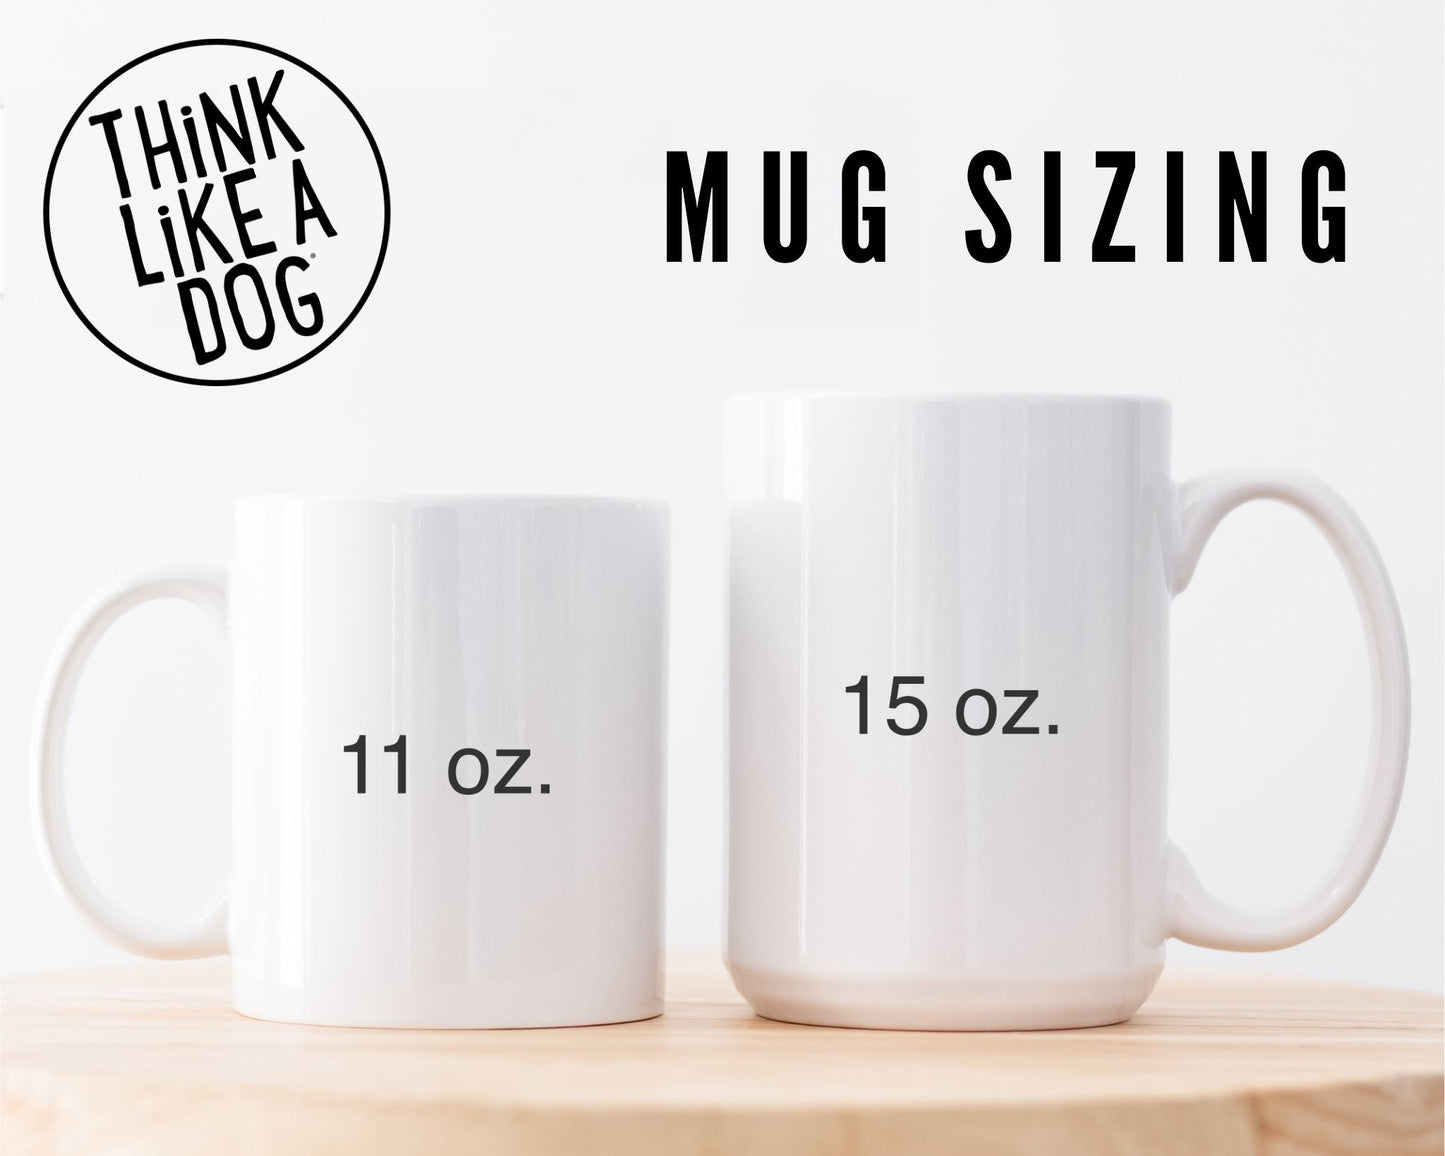 Two white ceramic mugs on a wooden surface with size labels. The smaller mug on the left has '11 oz.' printed on it. The larger mug on the right is labeled '15 oz.' and both are against a white background with the words 'MUG SIZING' in bold letters above them. In the upper left corner is a circular logo with the words "THiNK LiKE A DOG".